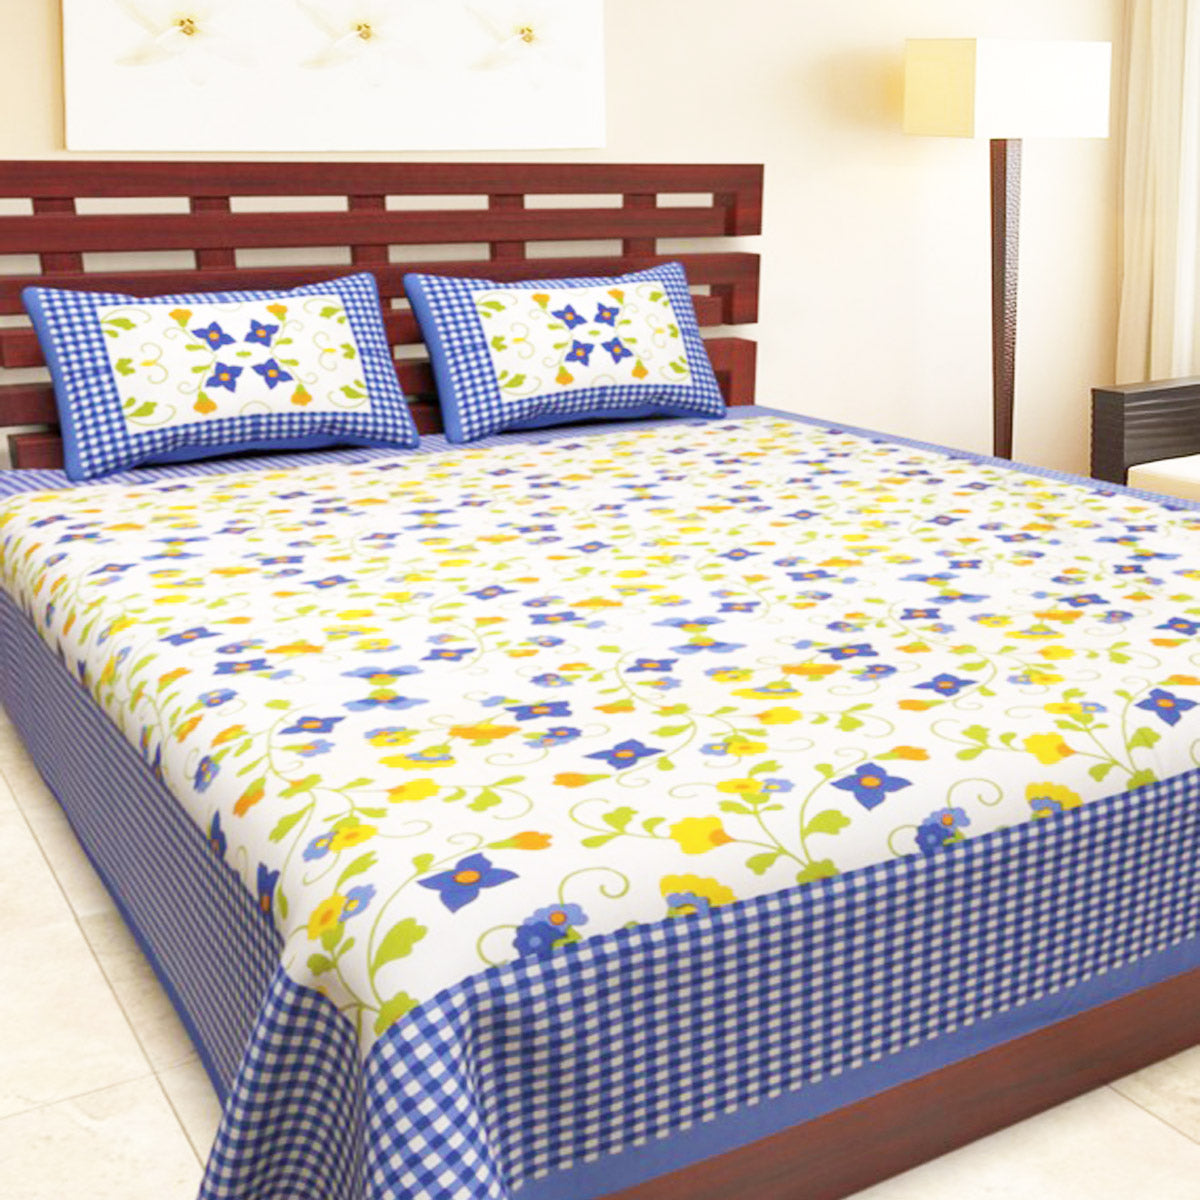 Latest Blue Floral Block Printed Check Bed Cover with Pillows